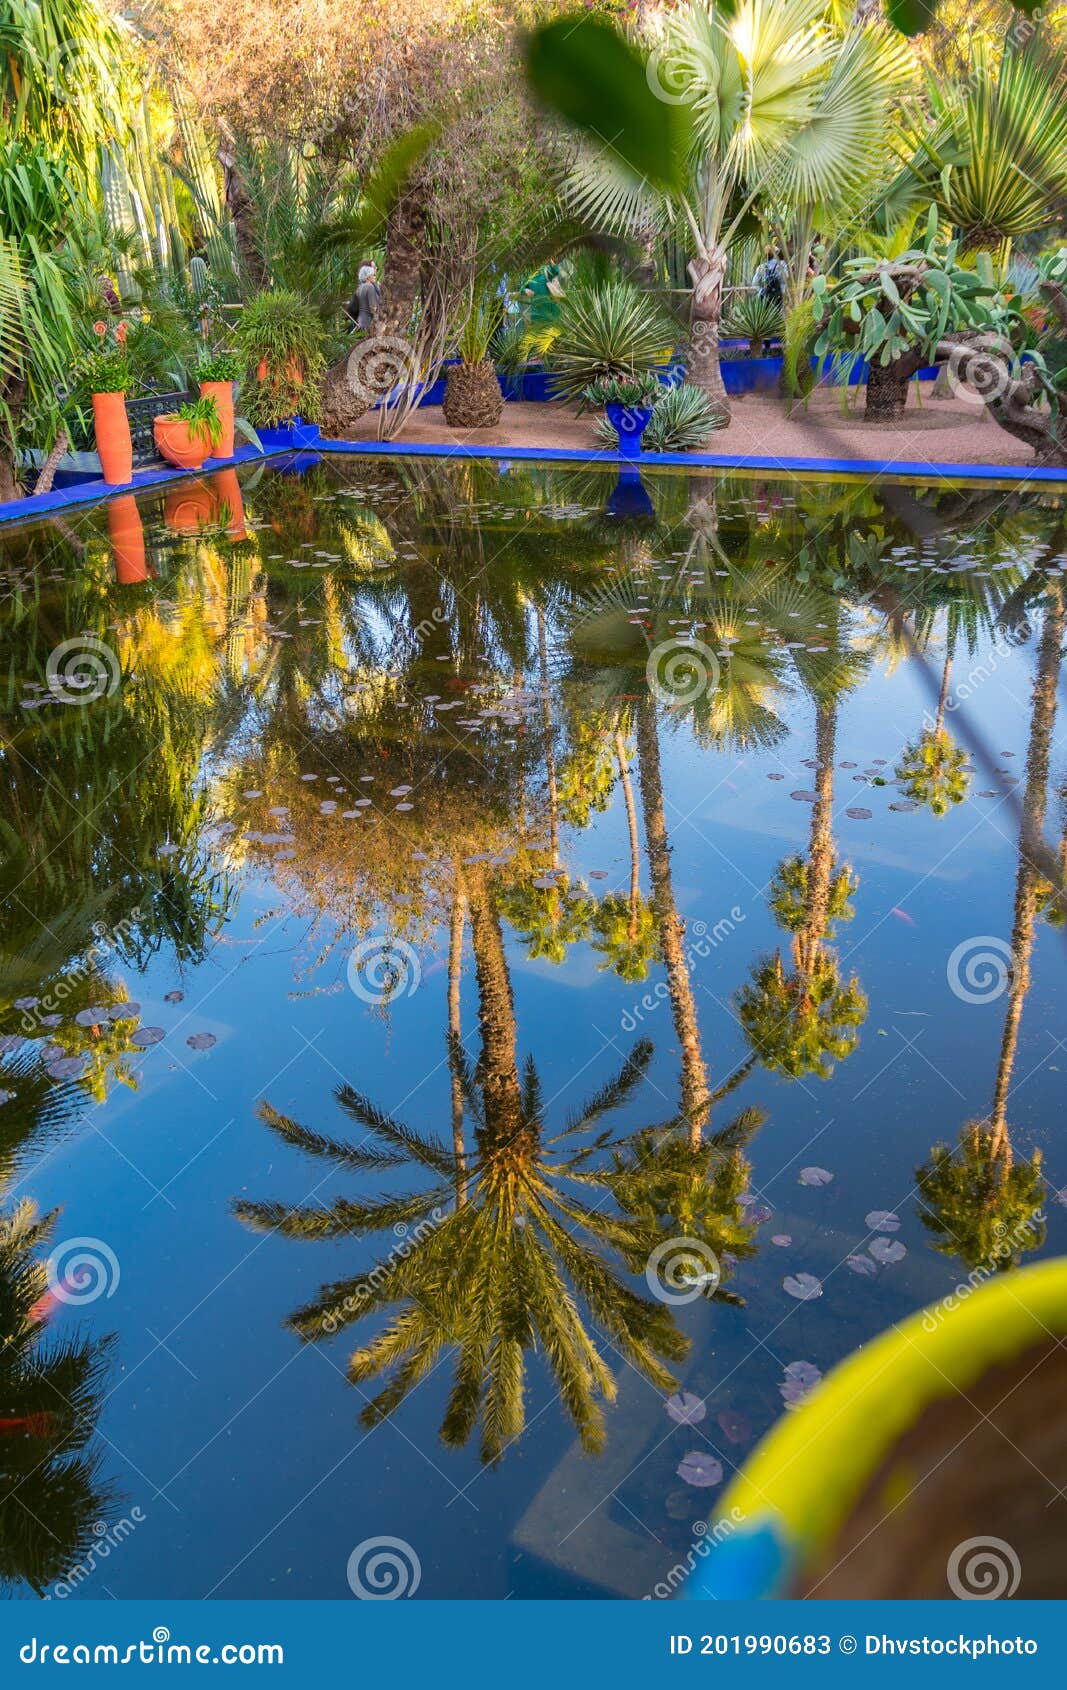 reflection of a palm tree in a bright blue fountain and a garden of captus and exotic plants. majorelle garden. concept of travel